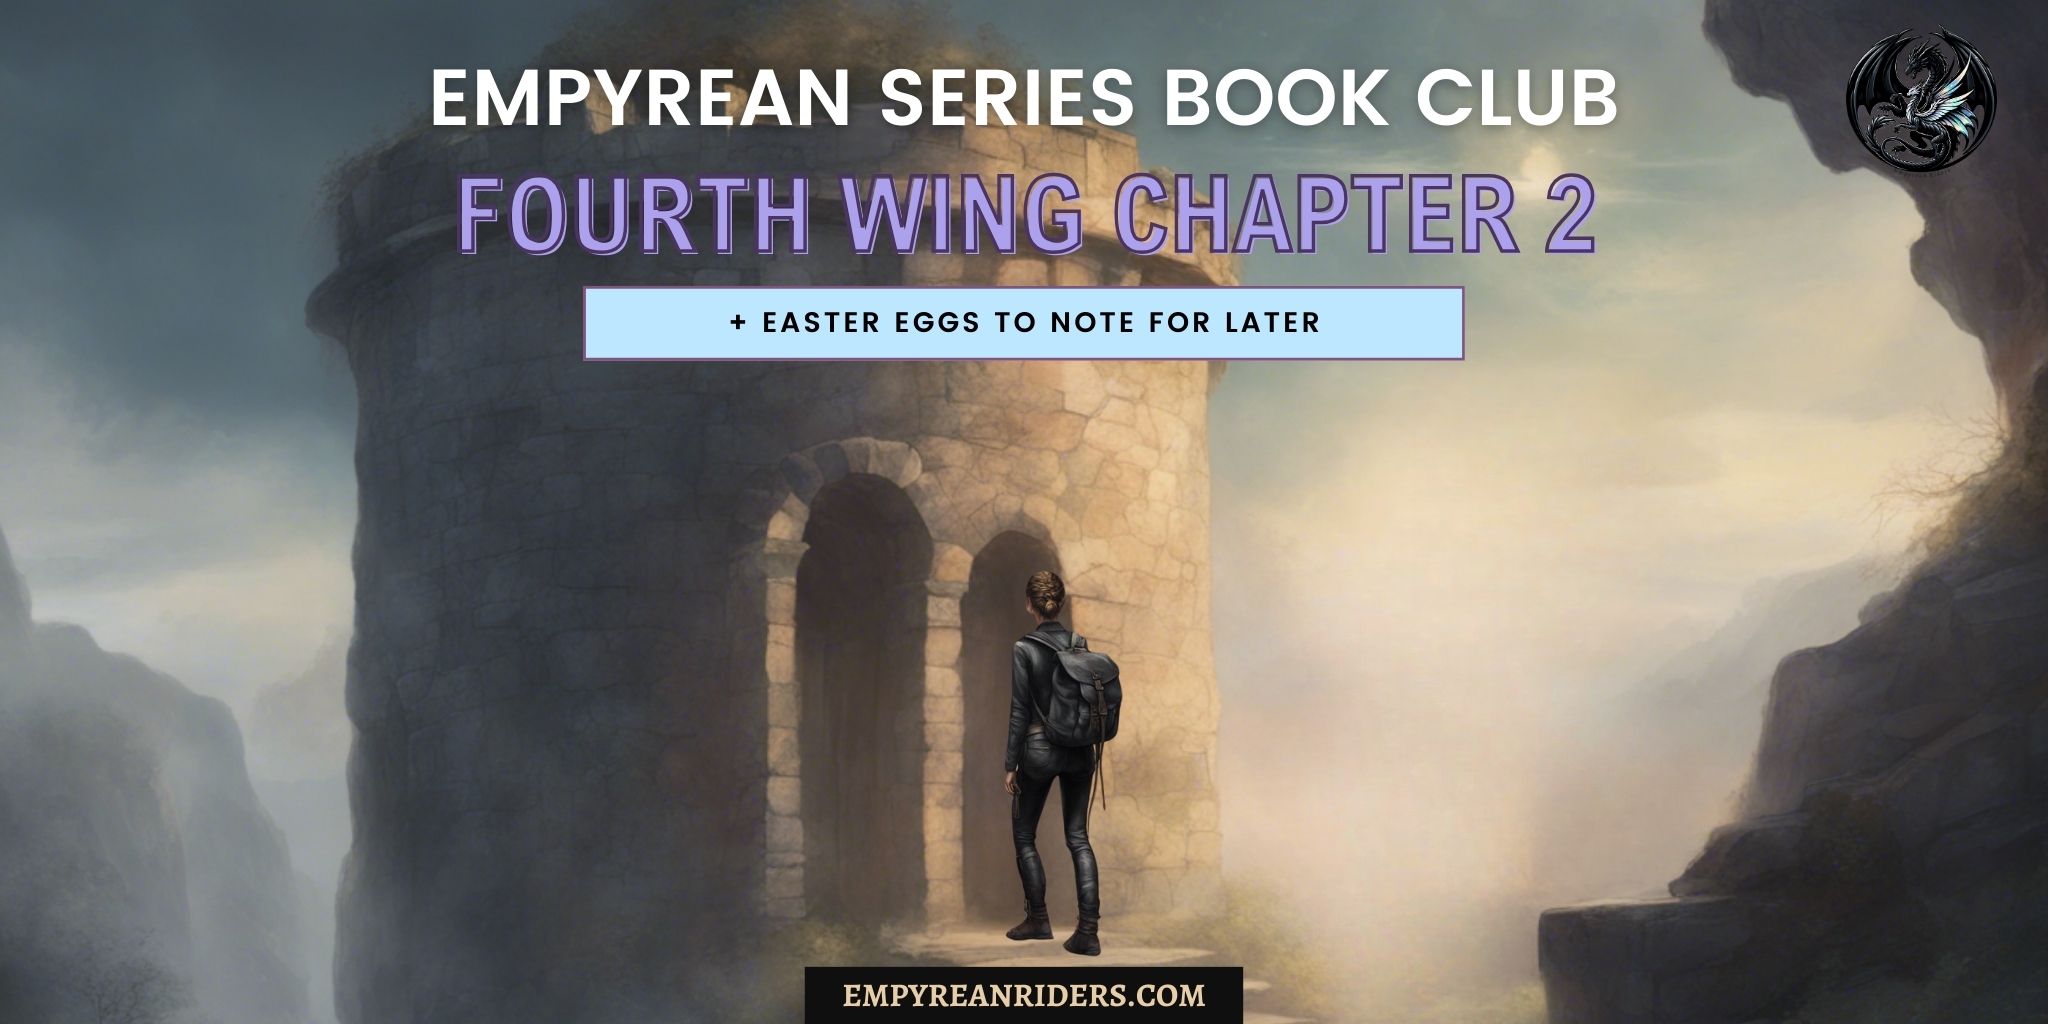 Empyrean Series Book Club Fourth Wing Chapter 2 Read Along